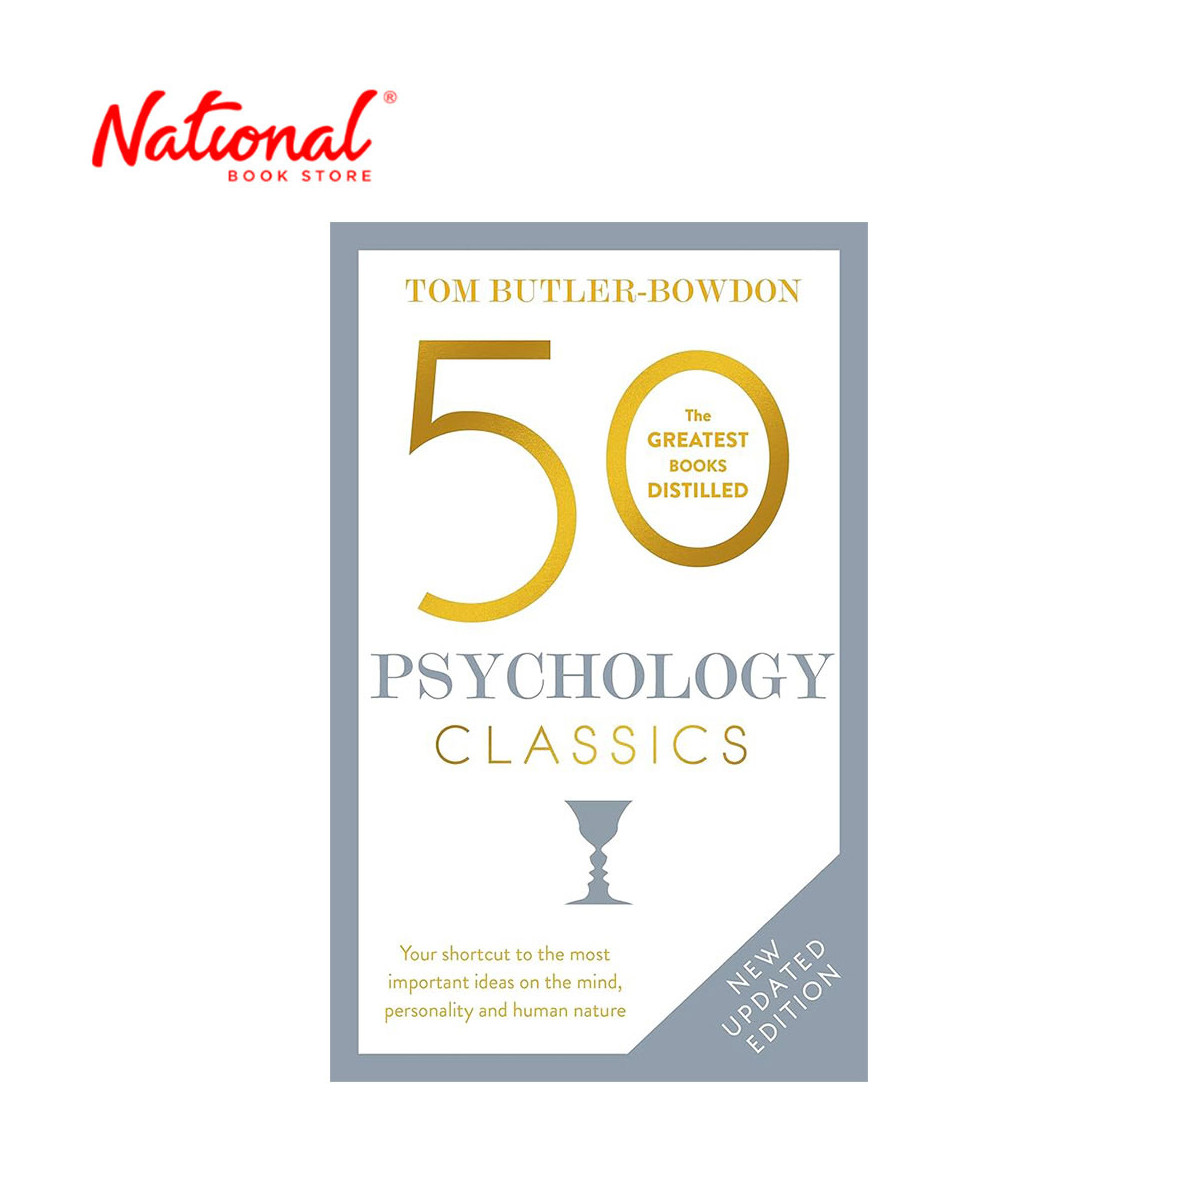 50 Psychology Classics by Tom Butler-Bowdon - Trade Paperback